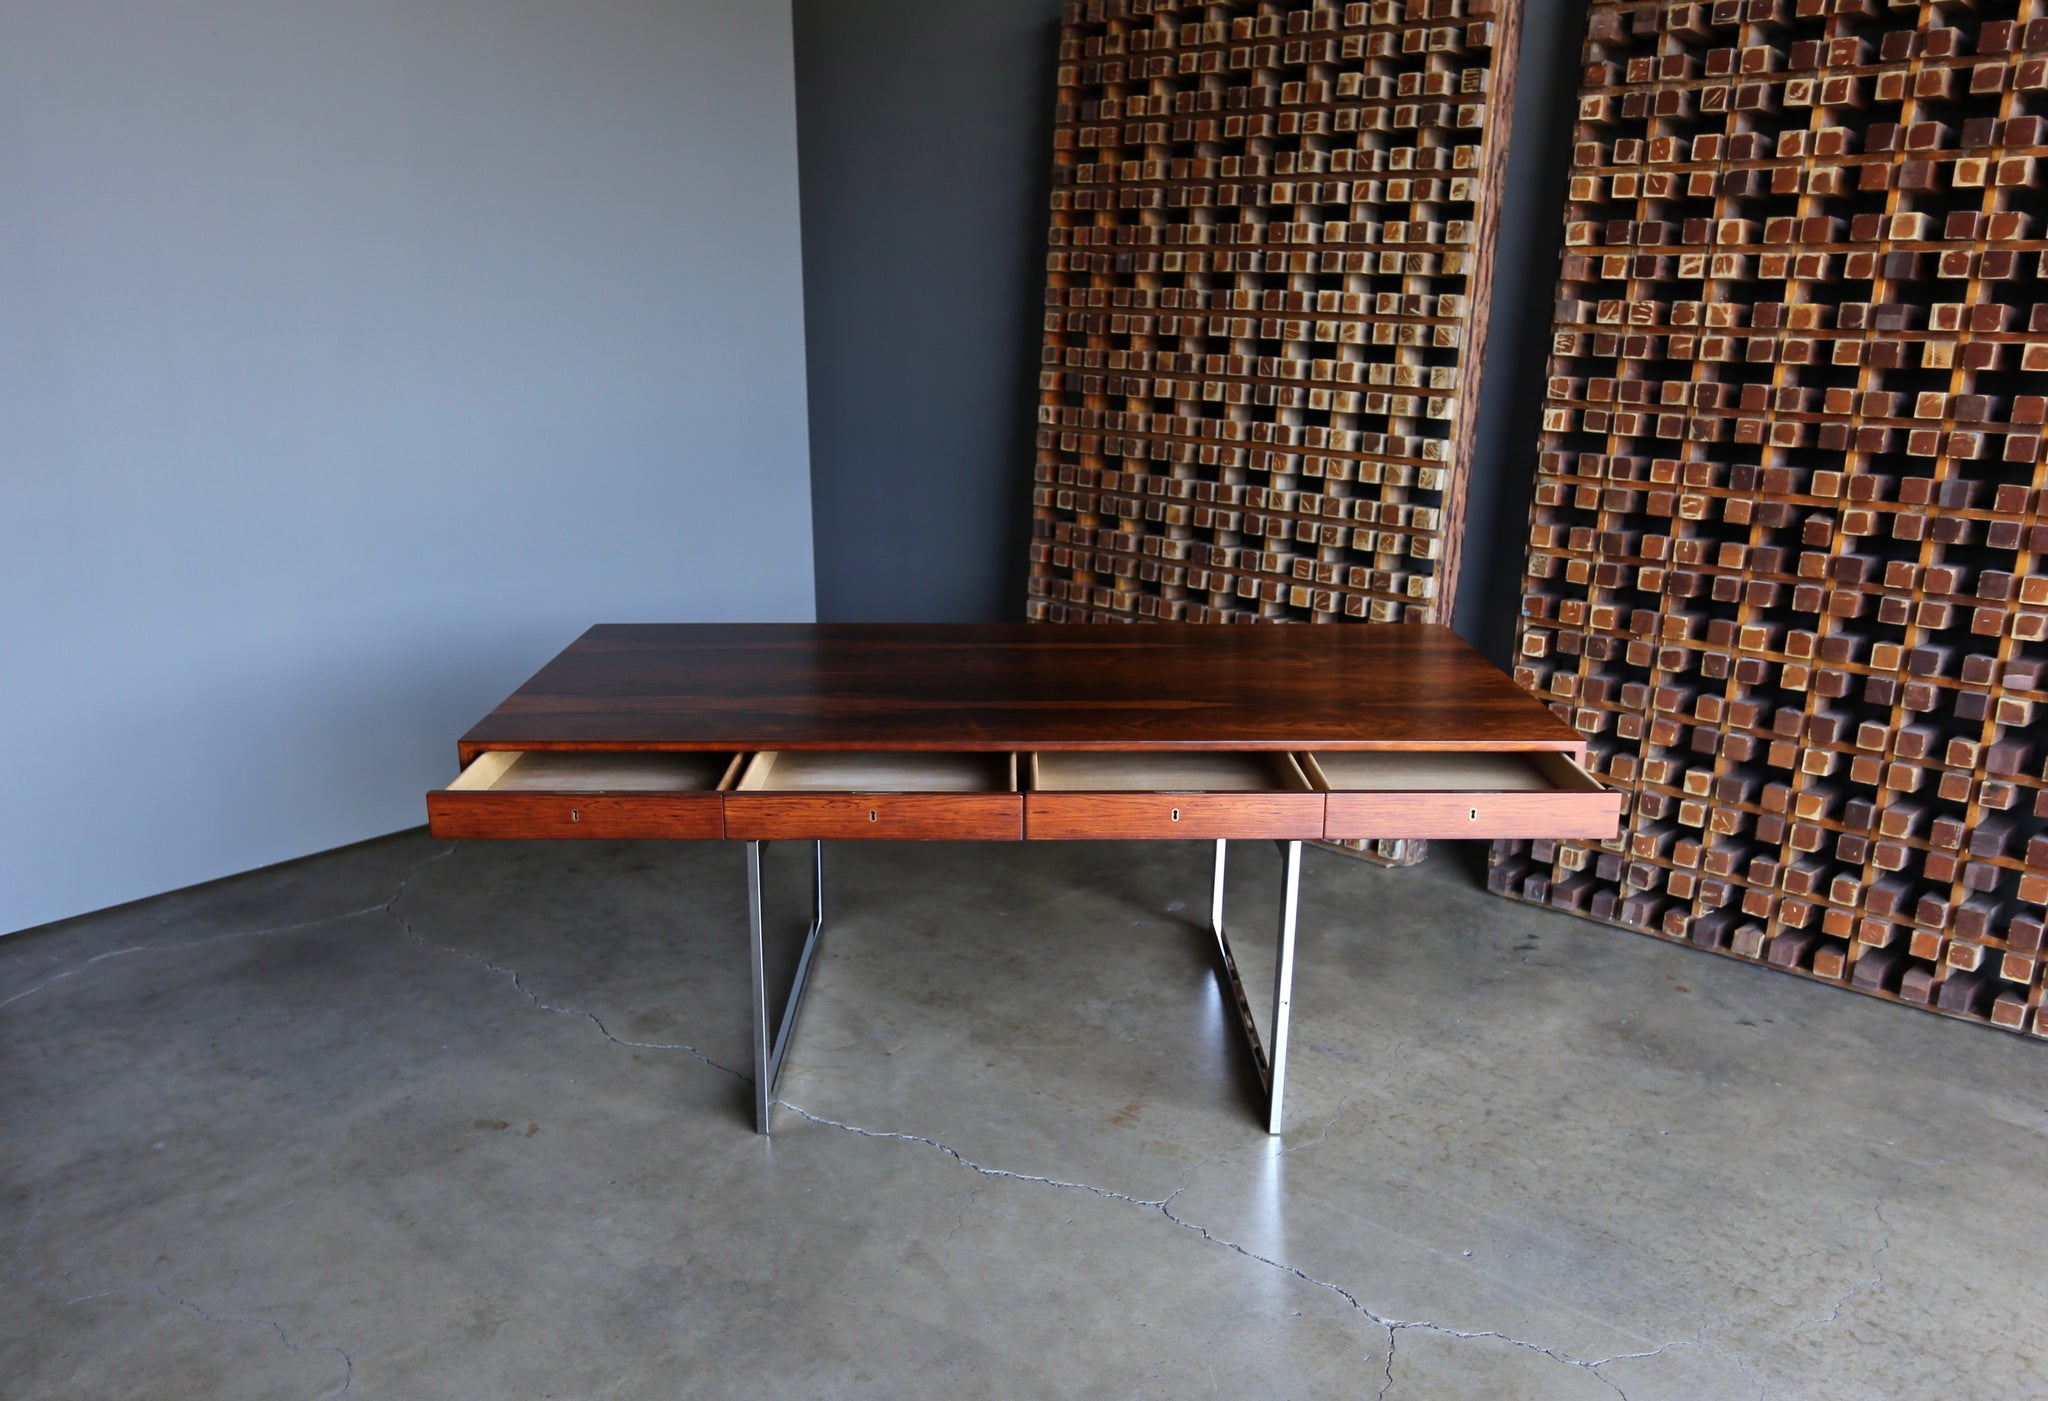 = SOLD = Bodil Kjaer Rosewood Desk for E. Pederson and Sons A/S circa 1959